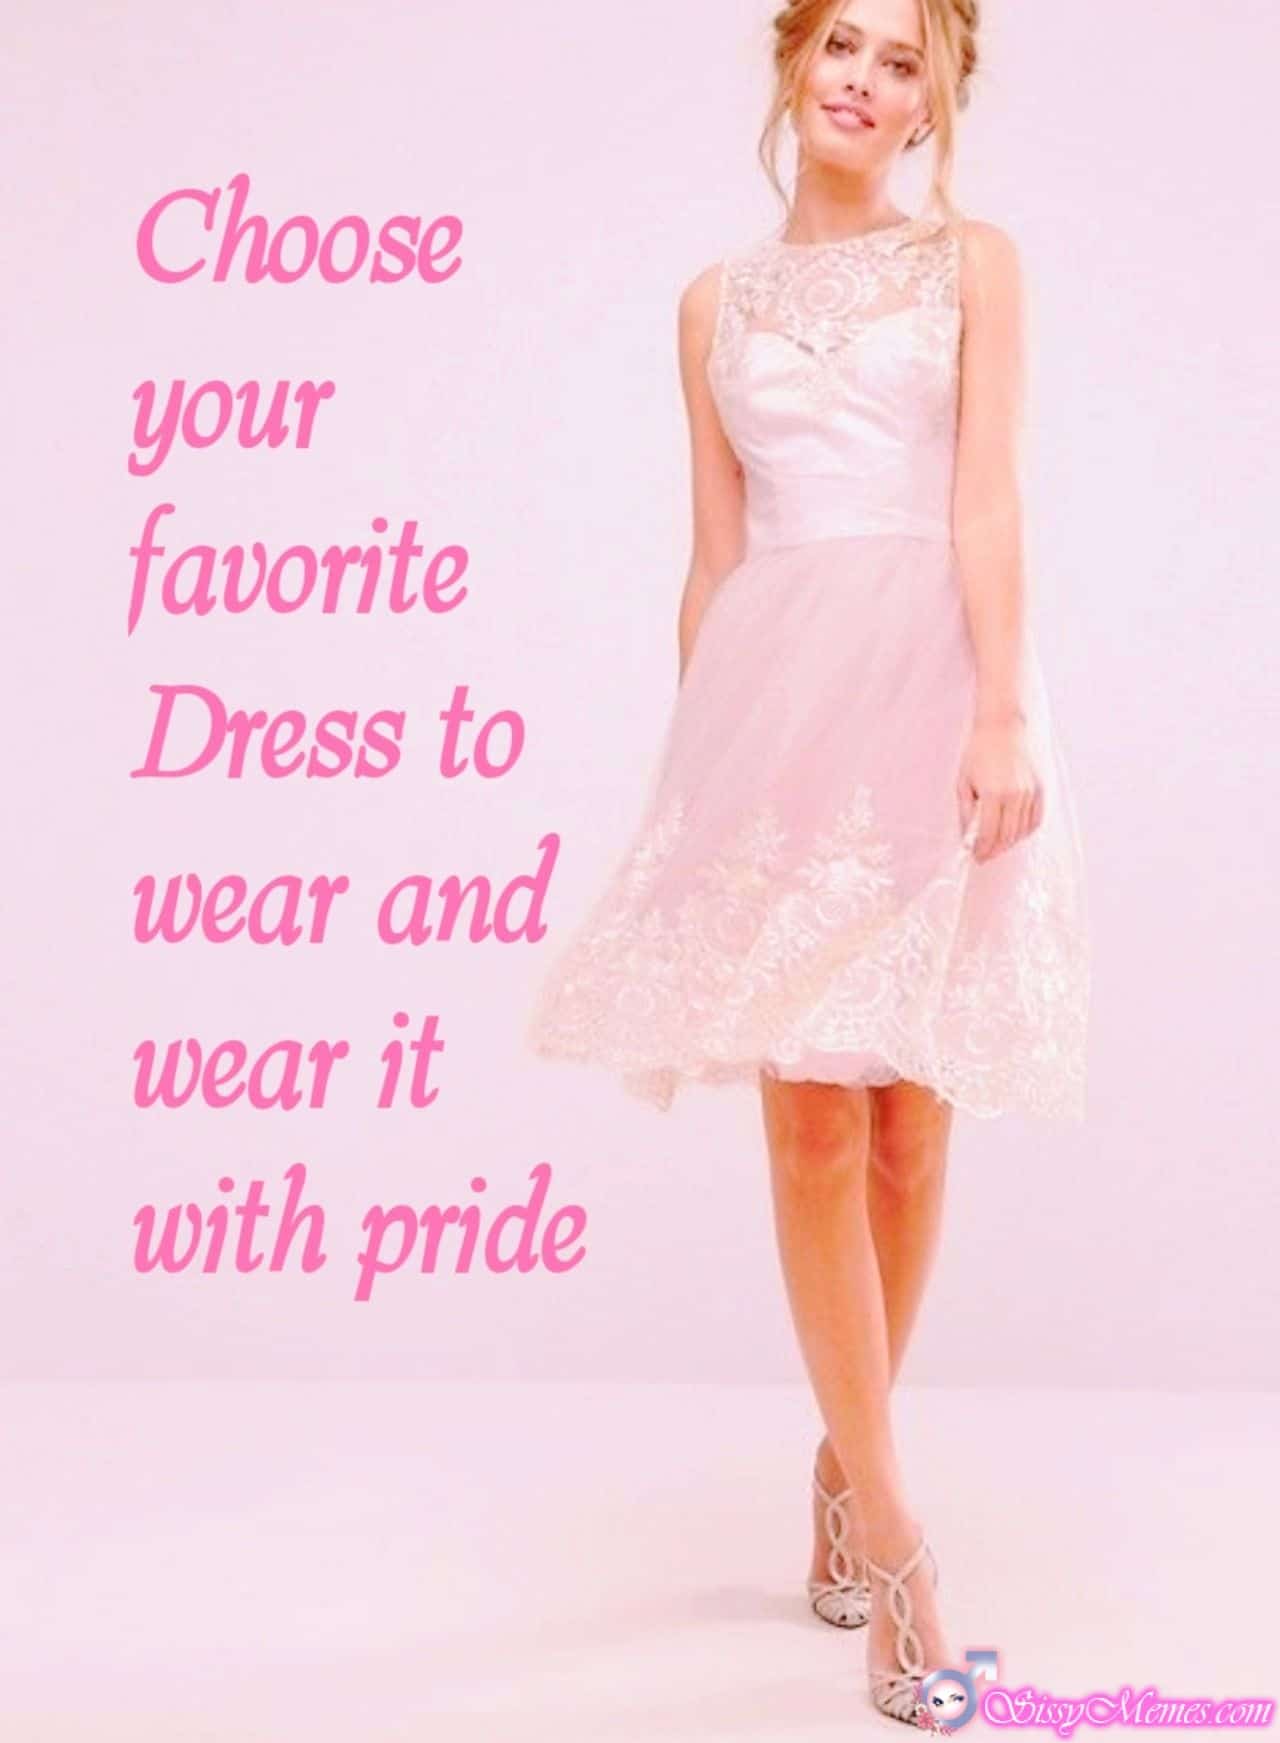 Training Hypno Feminization Femboy sissy caption: Choose your favorite Dress to wear and wear it with pride The Most Feminine Sissytrap in the World